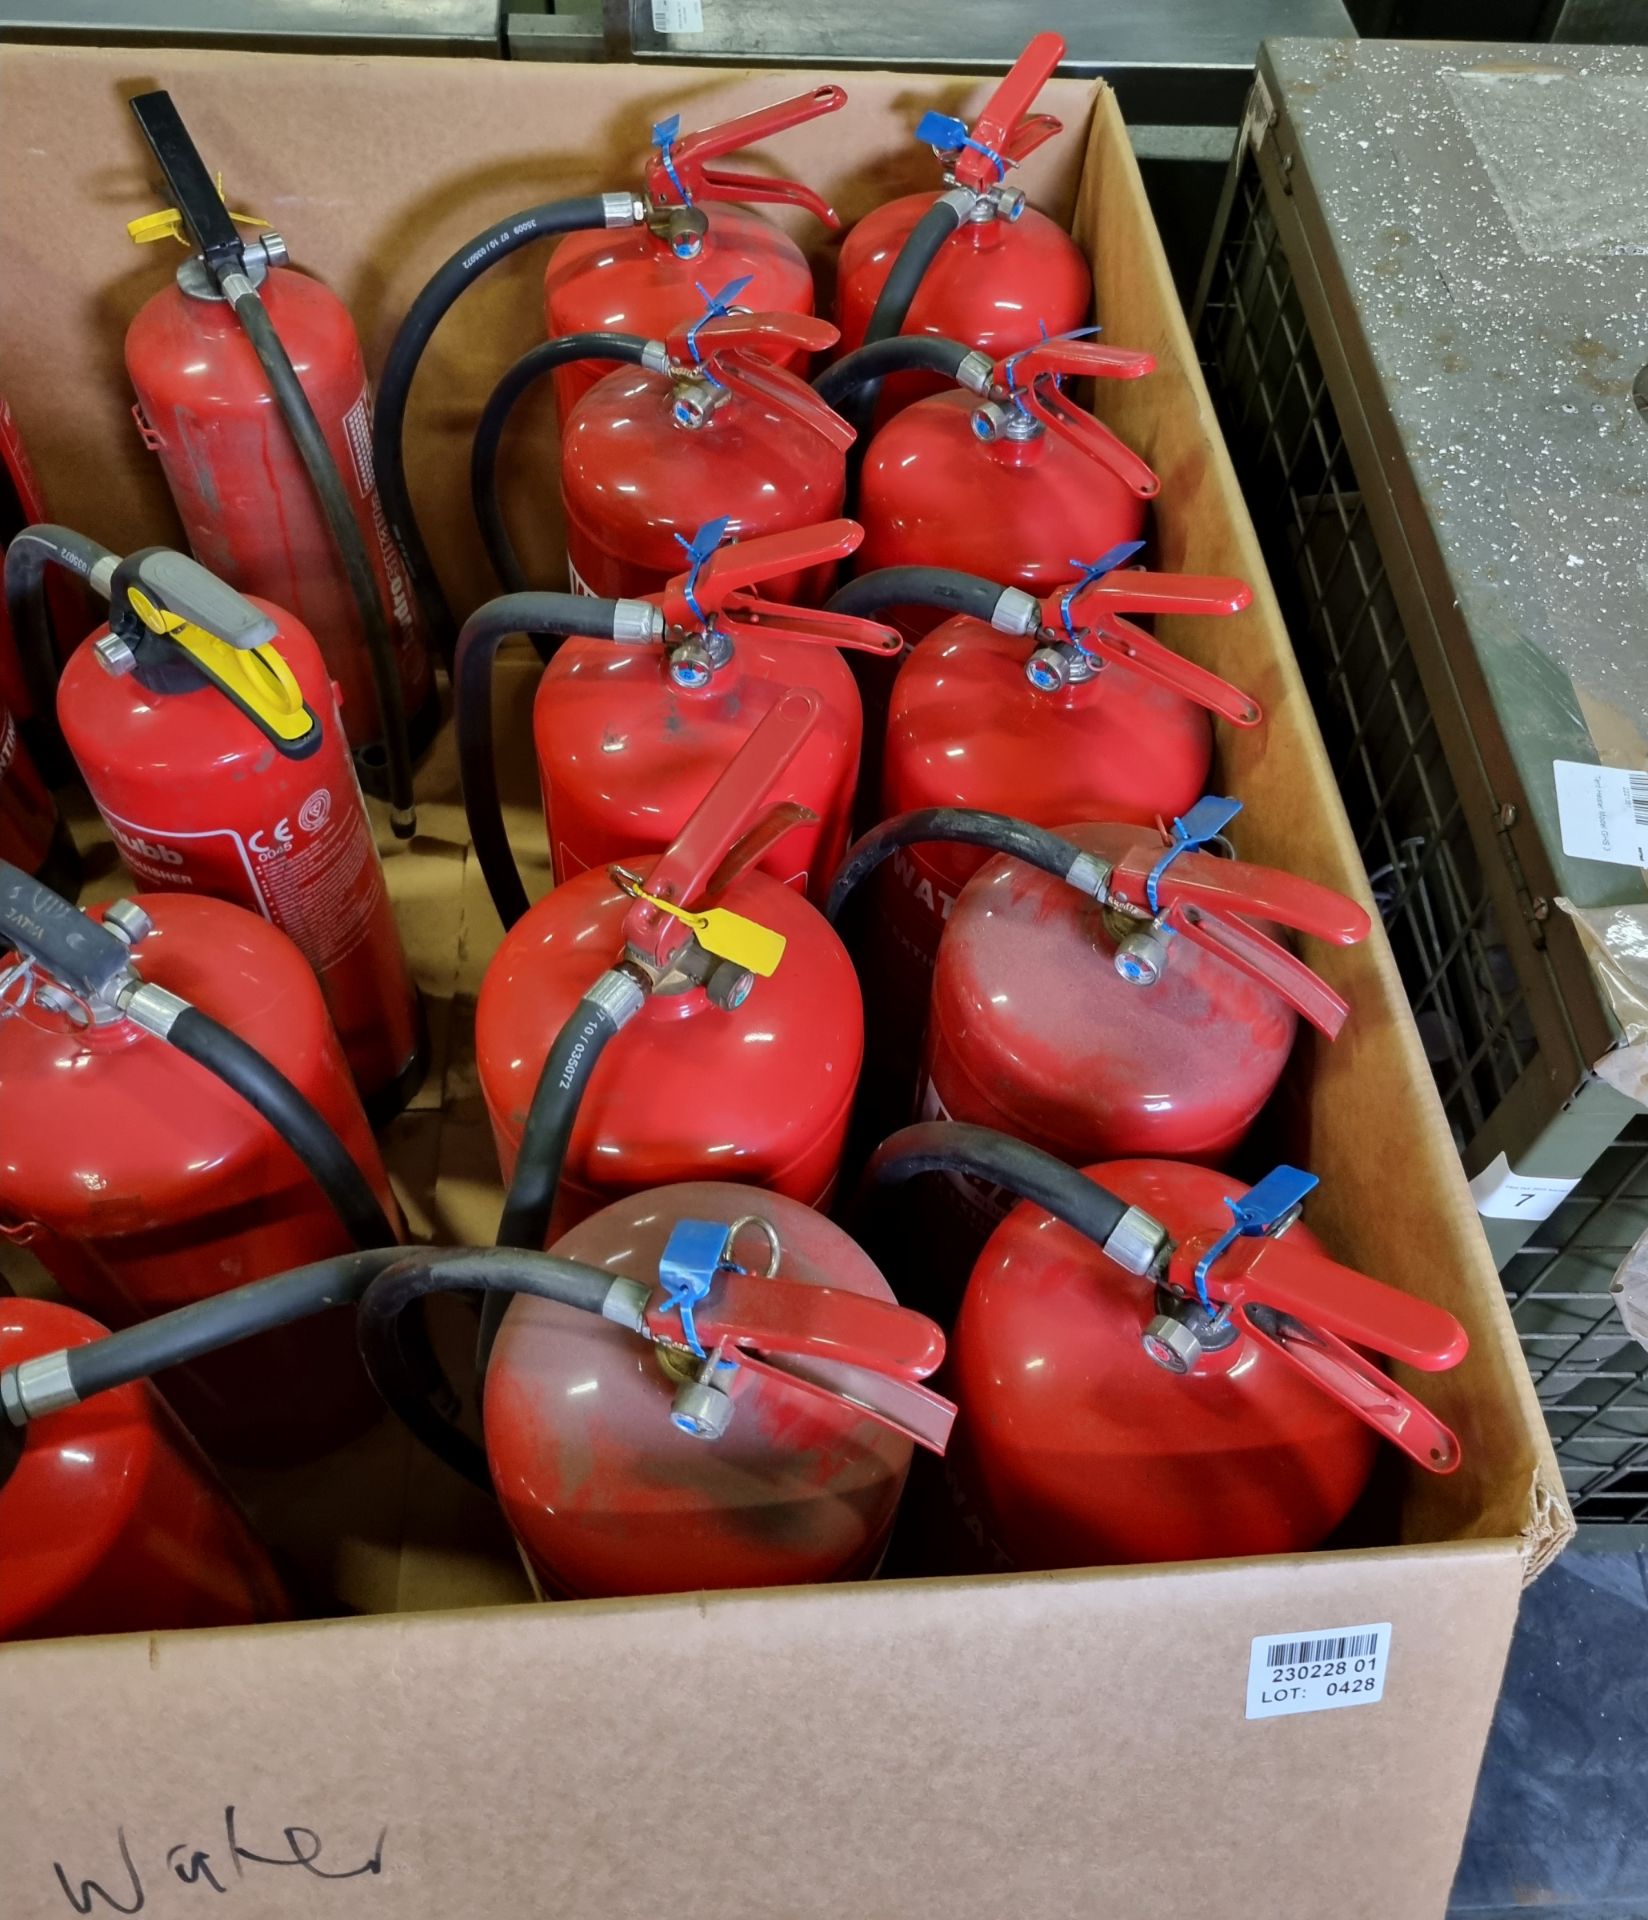 24 x Water fire extinguishers - beyond expiration date, will need checking and retesting - Image 3 of 4